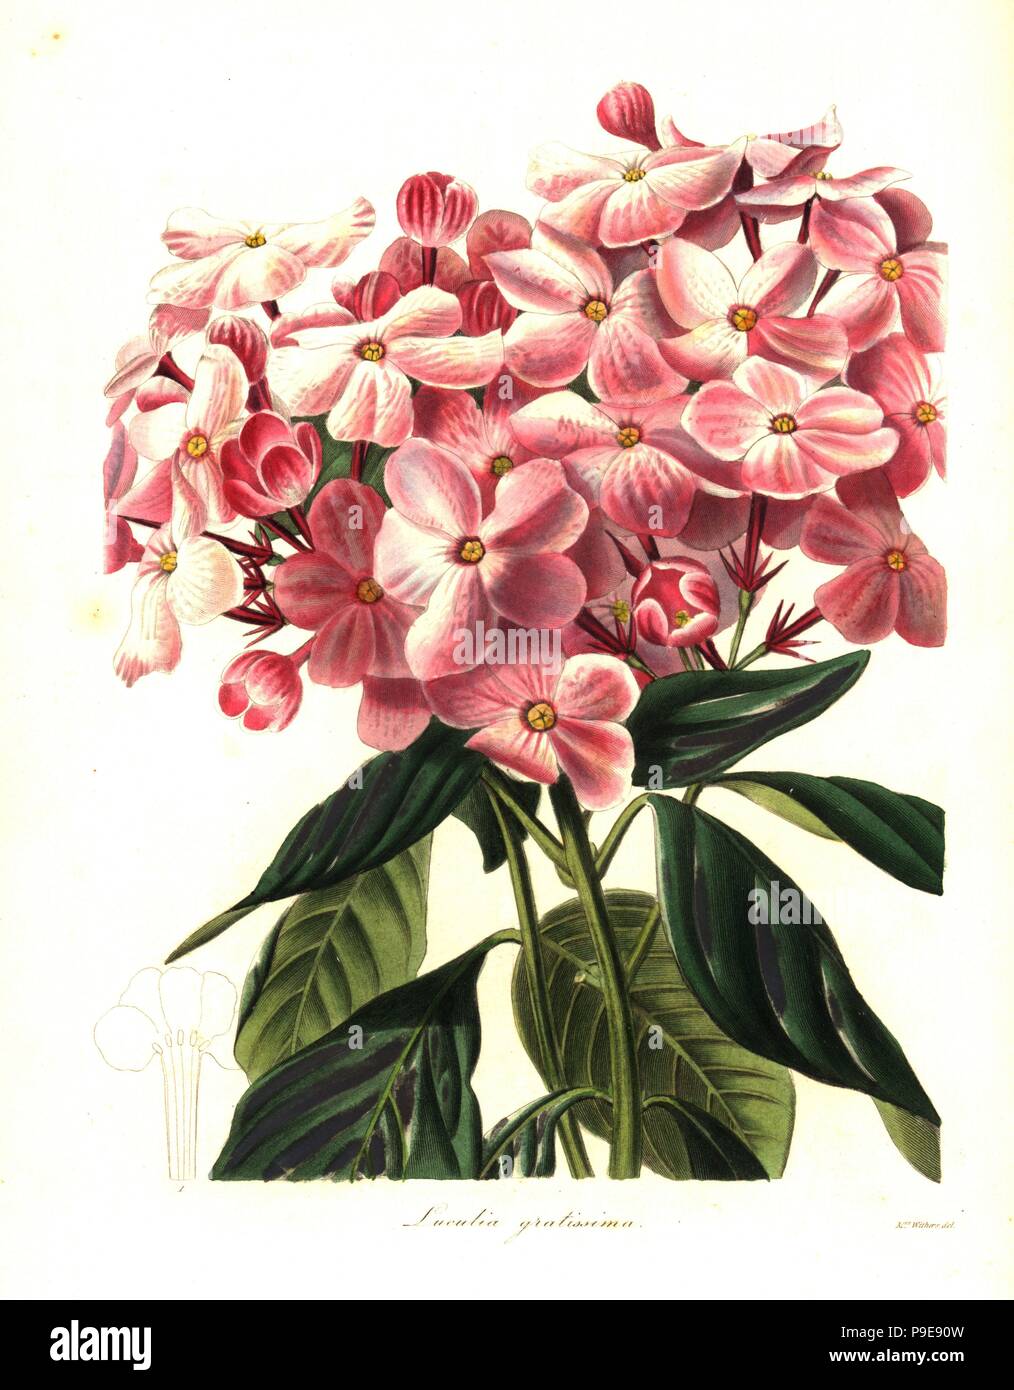 Sweet-flowered luculia, Luculia gratissima. Handcoloured copperplate engraving after a botanical illustration by Mrs Augusta Withers from Benjamin Maund and the Rev. John Stevens Henslow's The Botanist, London, 1836. Stock Photo